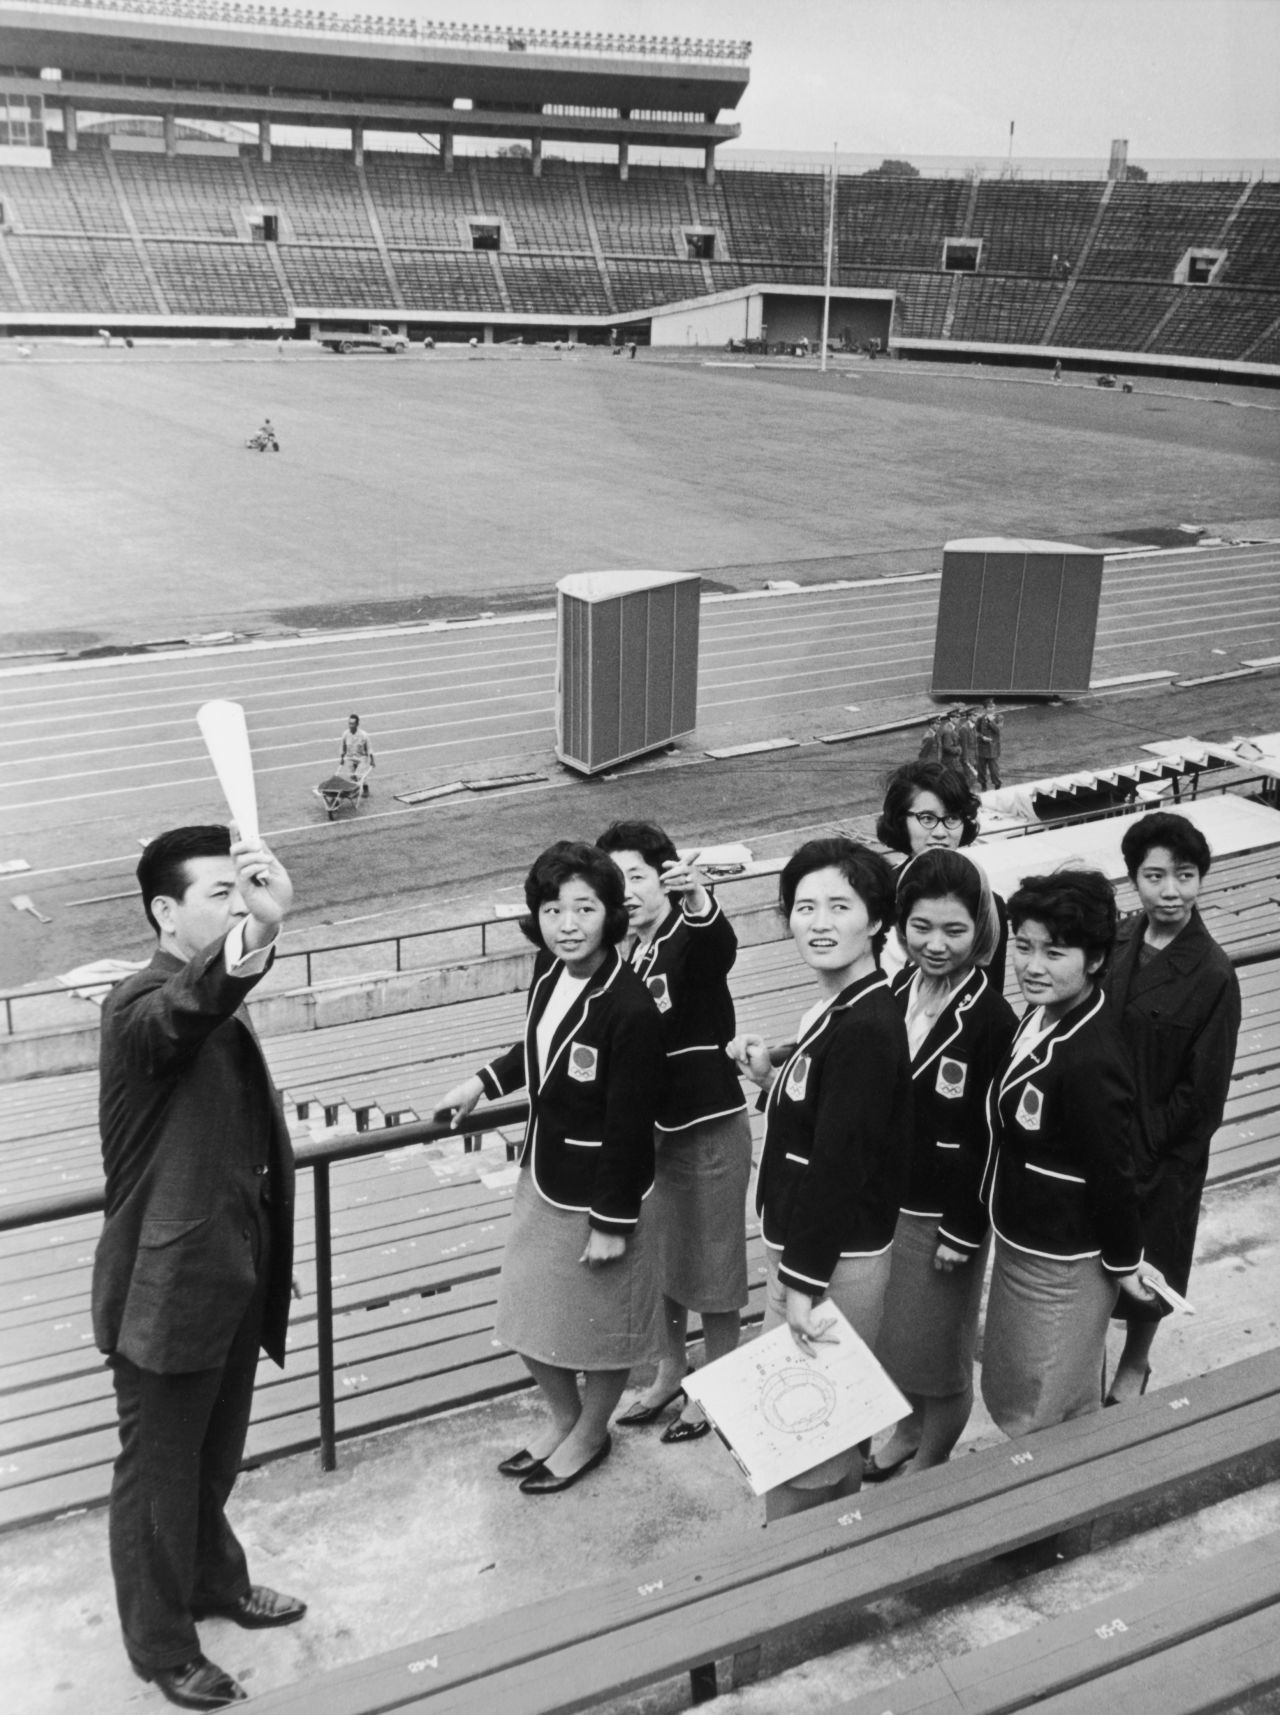 Olympic hostesses receive a briefing from an official at the main stadium in Tokyo, 1964.